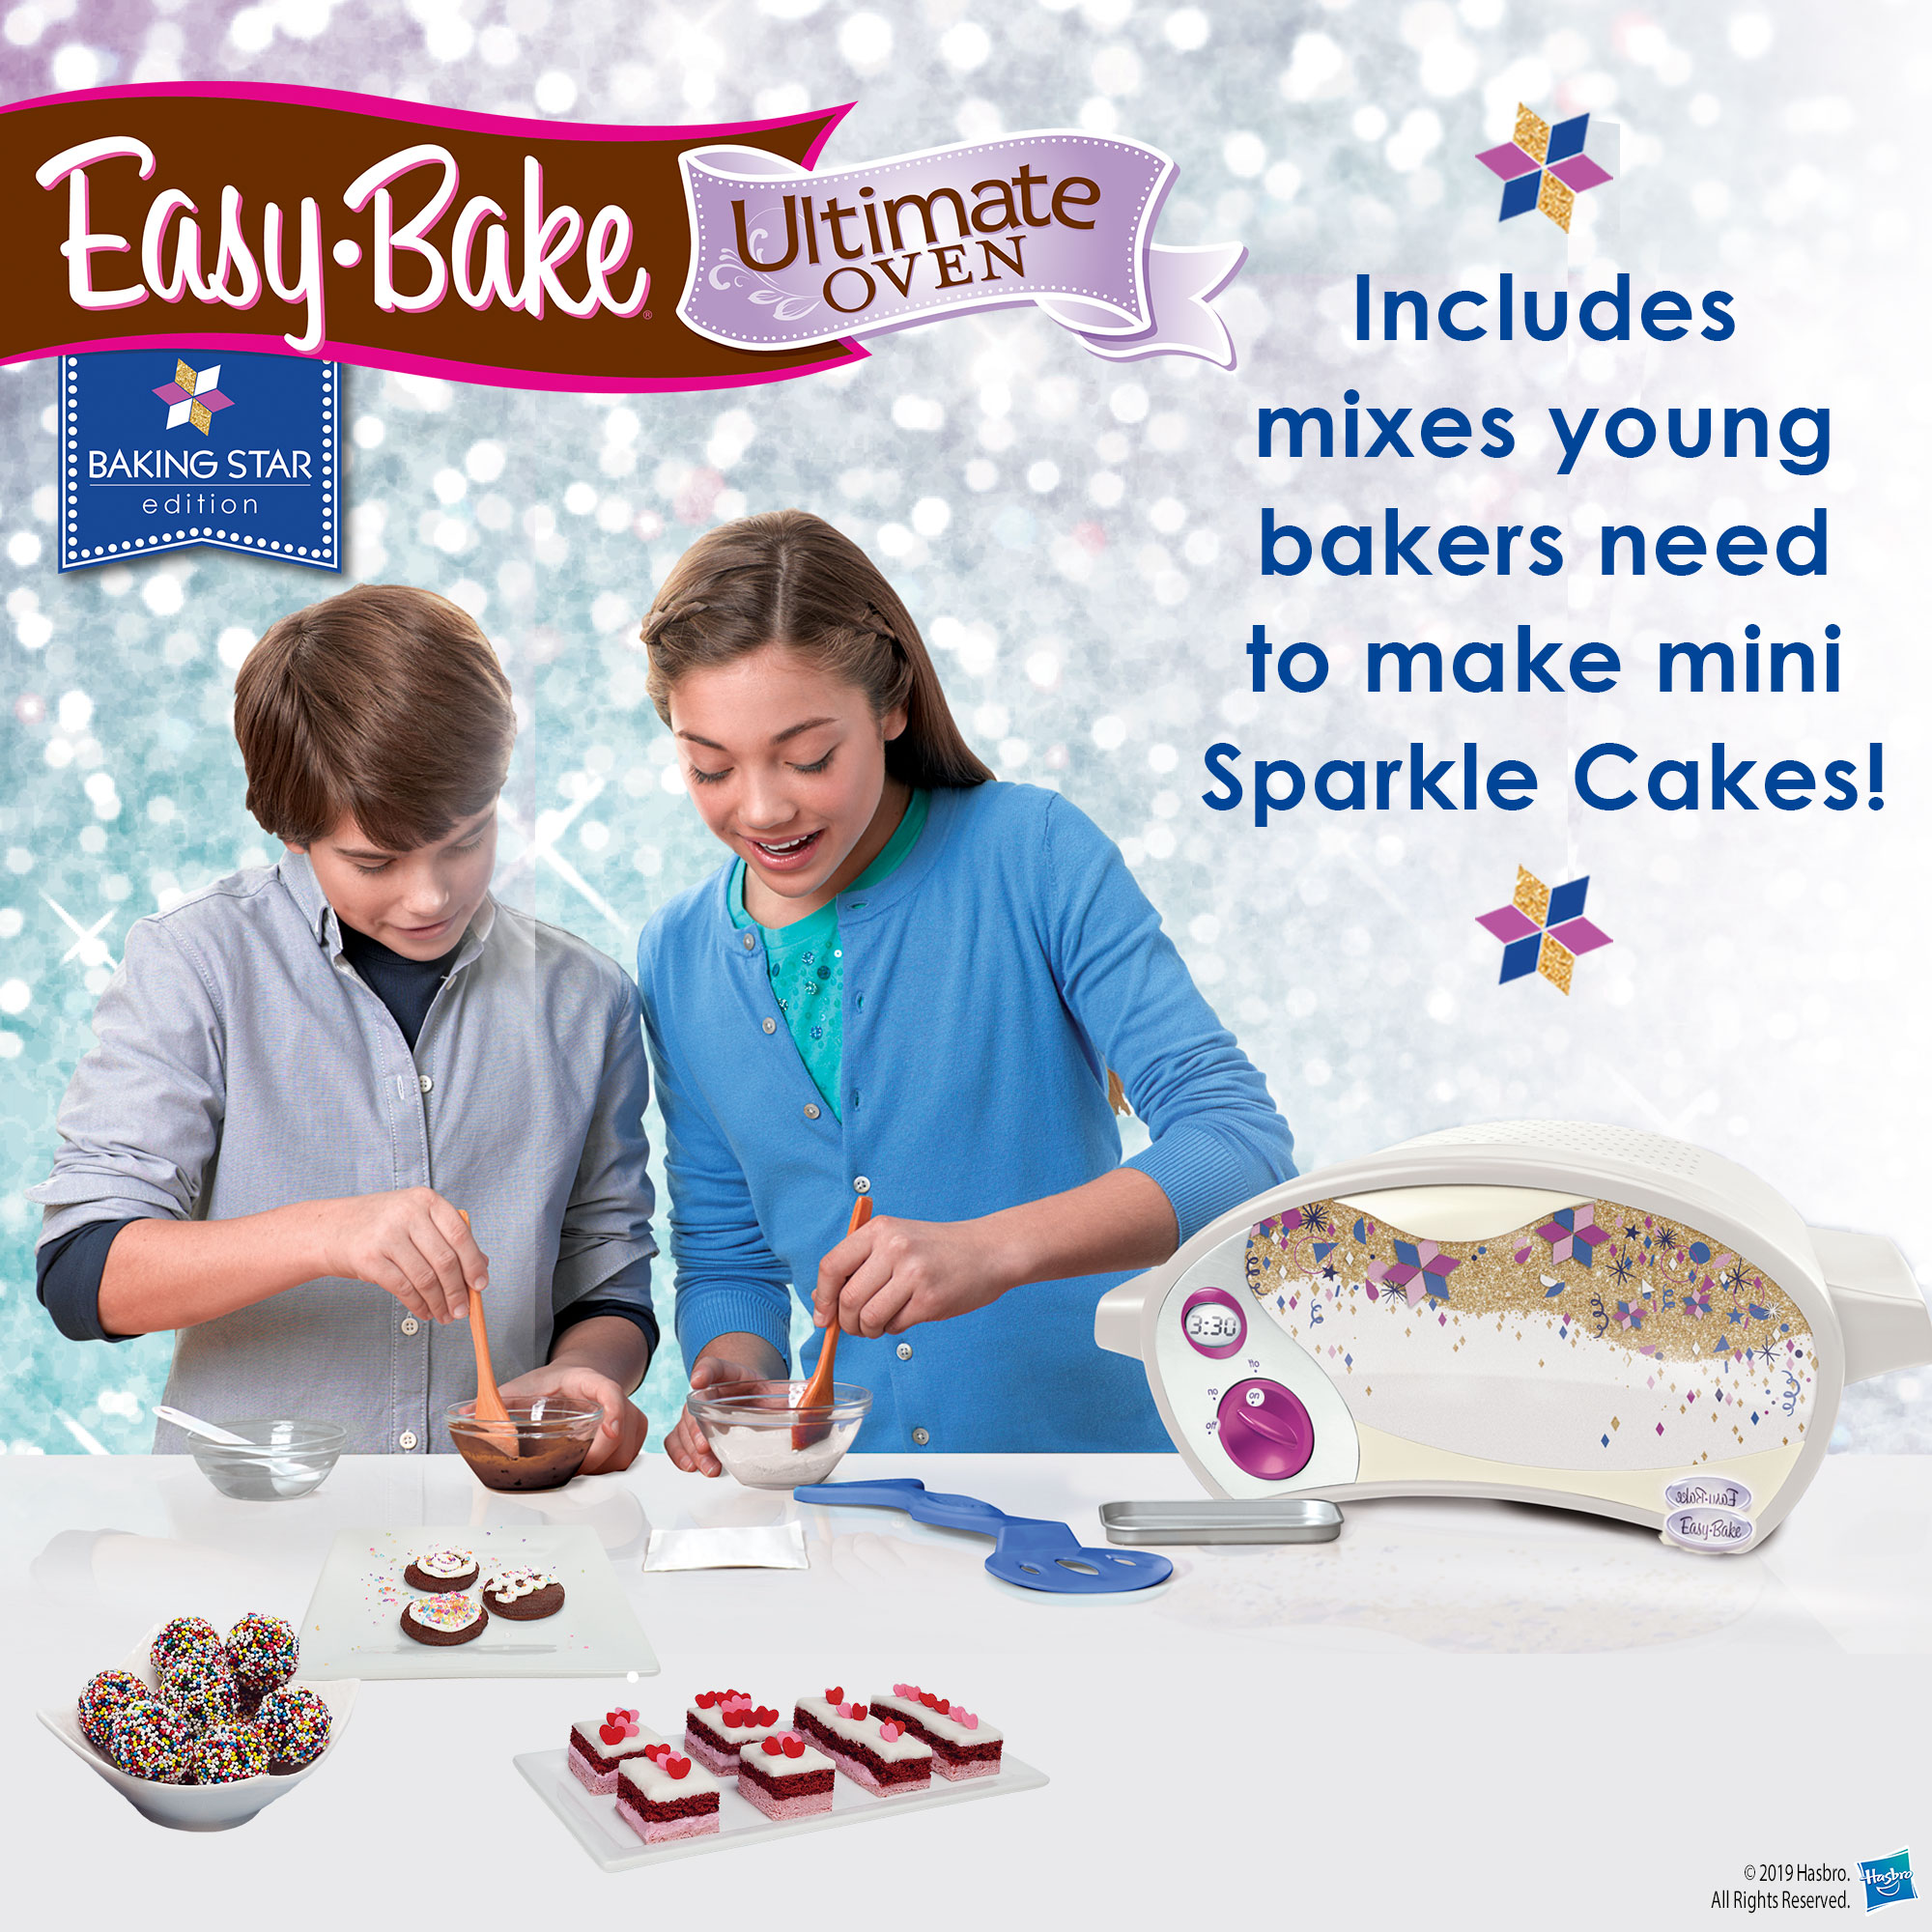 Easy-Bake Ultimate Oven with 3 Free Mixes, Online Exclusive, for Ages 8 and Up - image 4 of 12